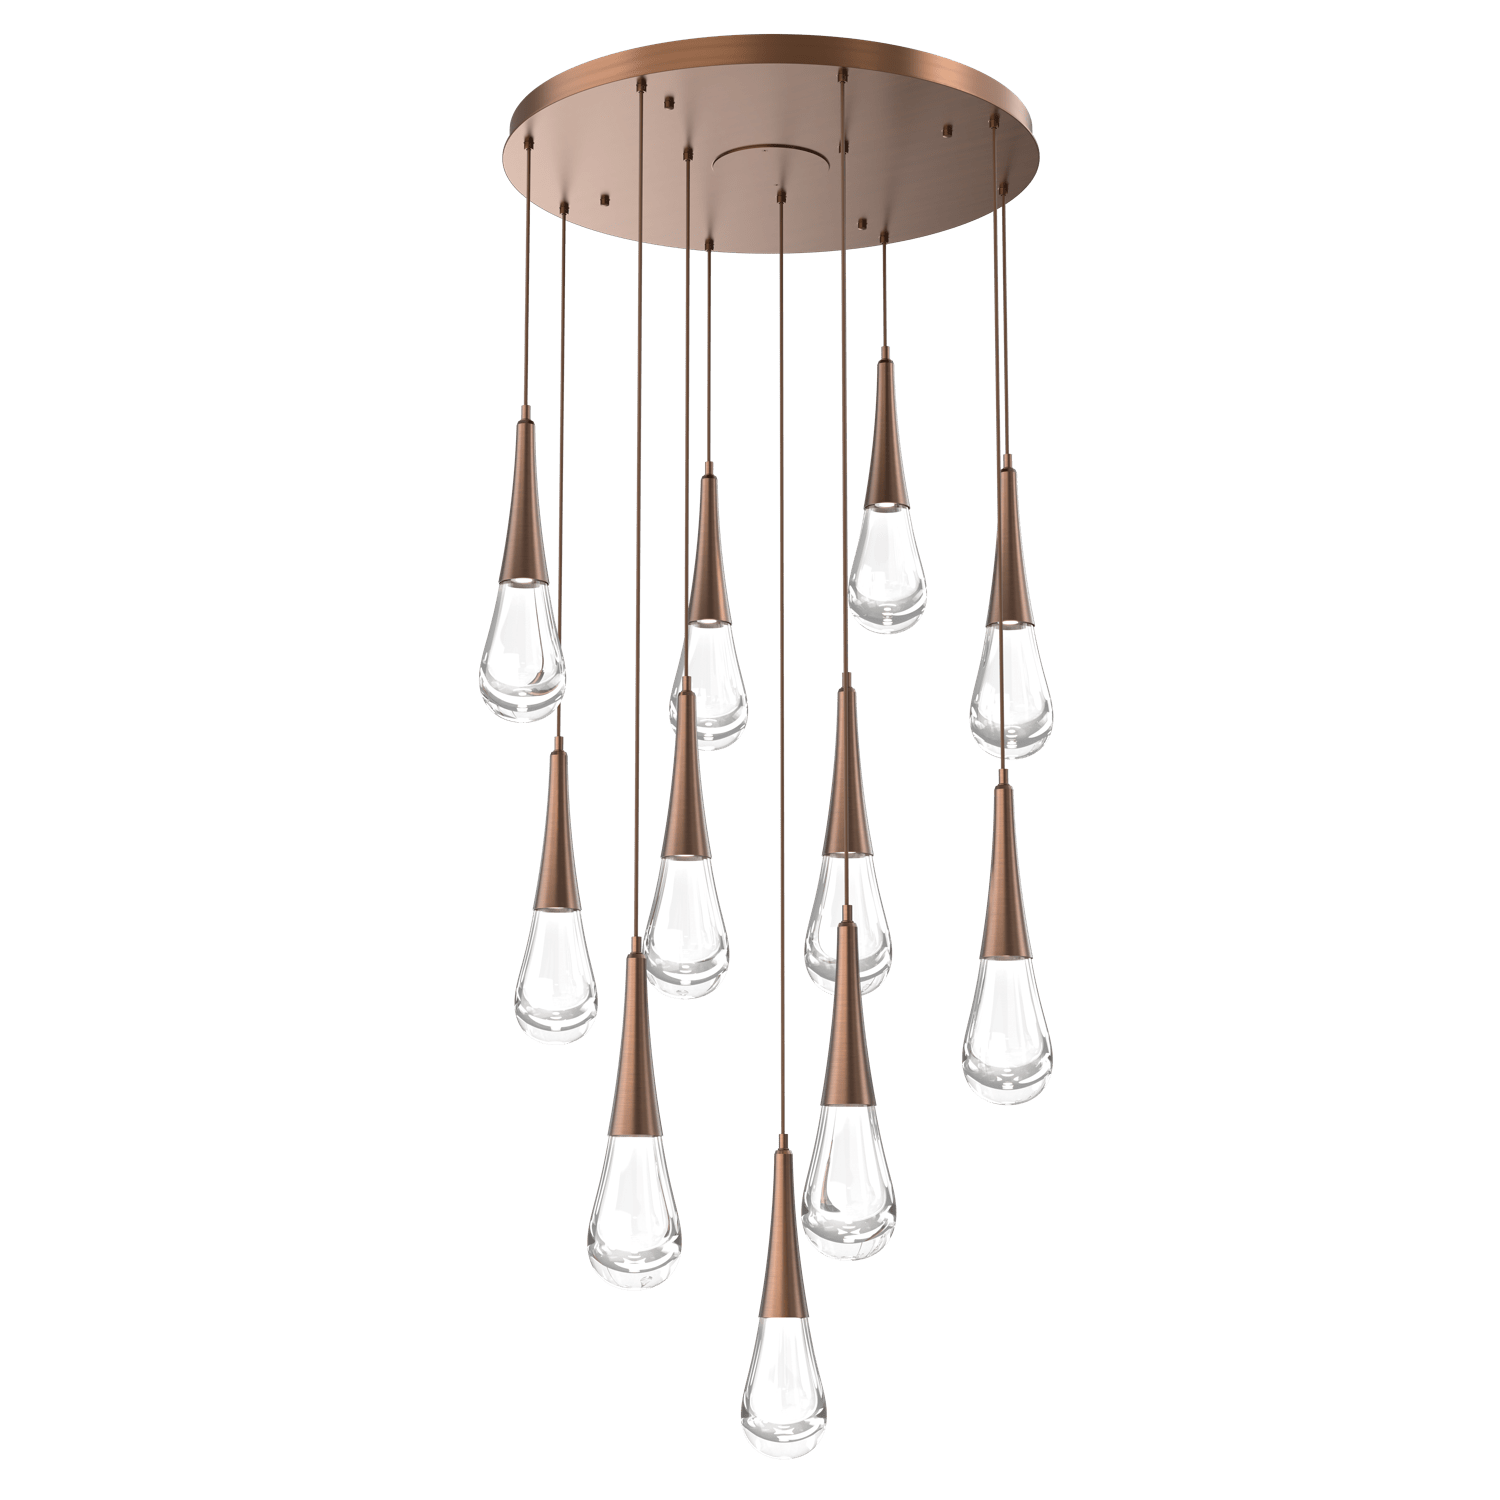 CHB0078-11-RB-Hammerton-Studio-Raindrop-11-light-round-pendant-chandelier-with-oil-rubbed-bronze-finish-and-clear-blown-glass-shades-and-LED-lamping